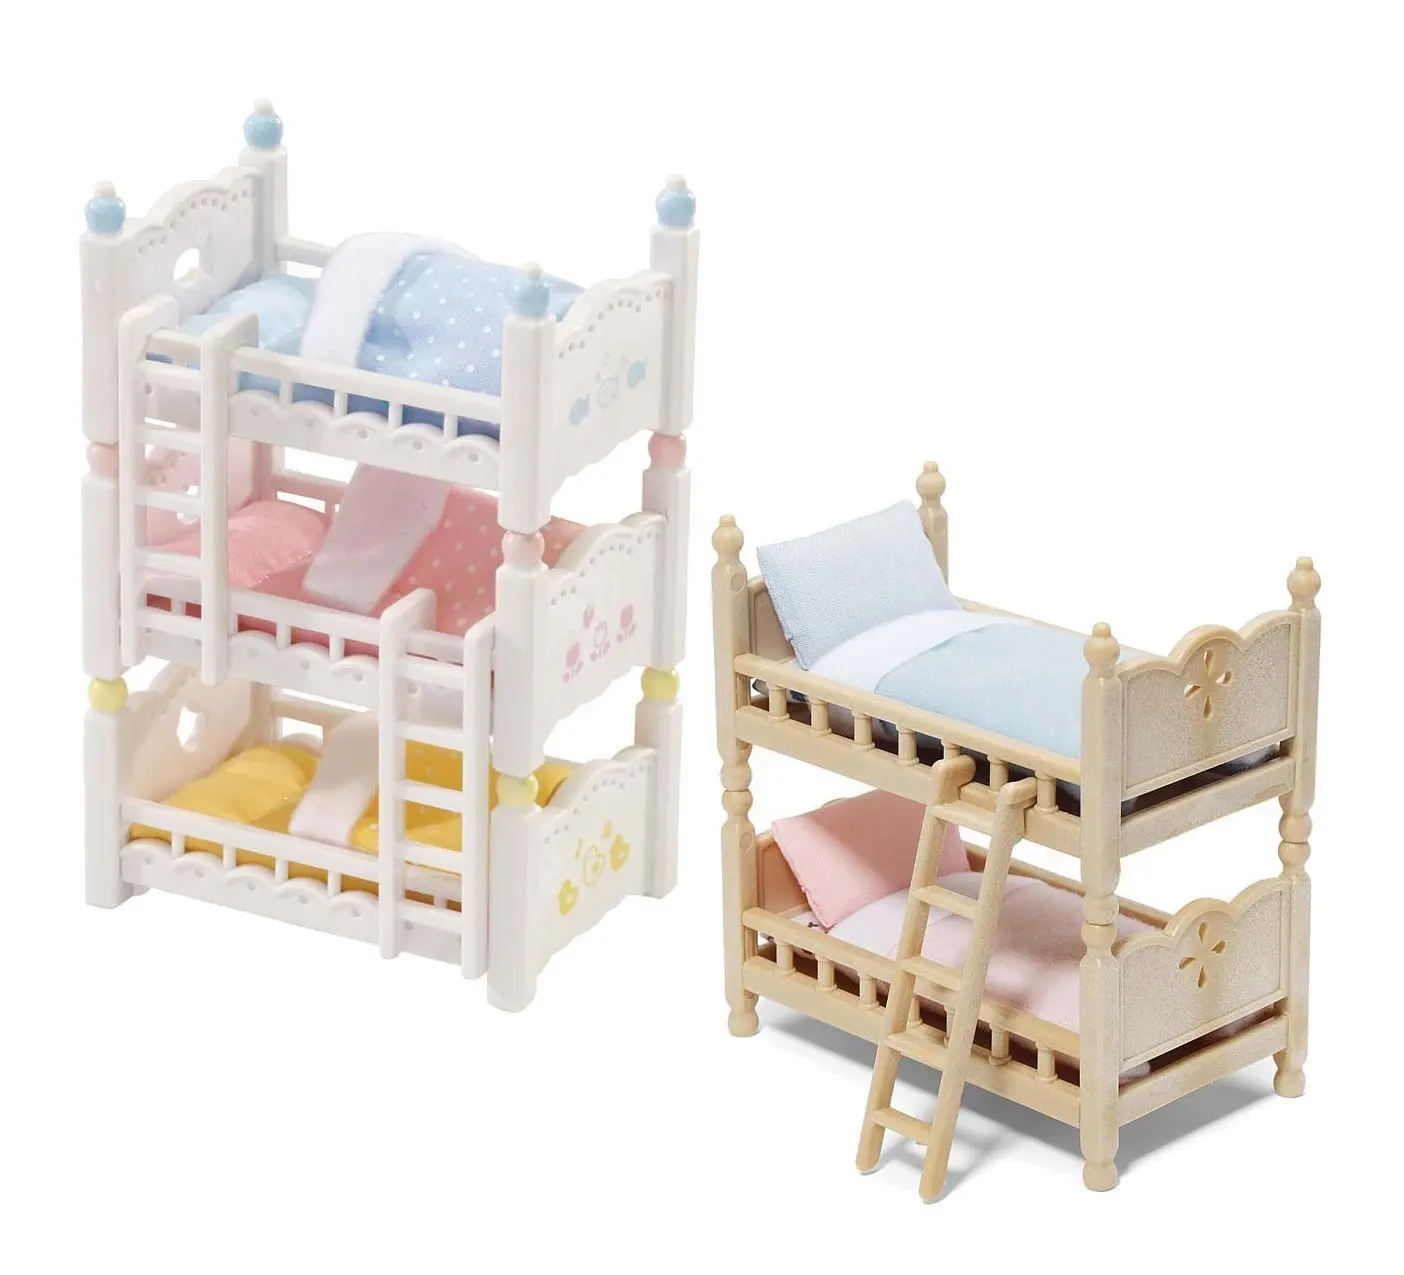 Calico Critters sister Loft Bed